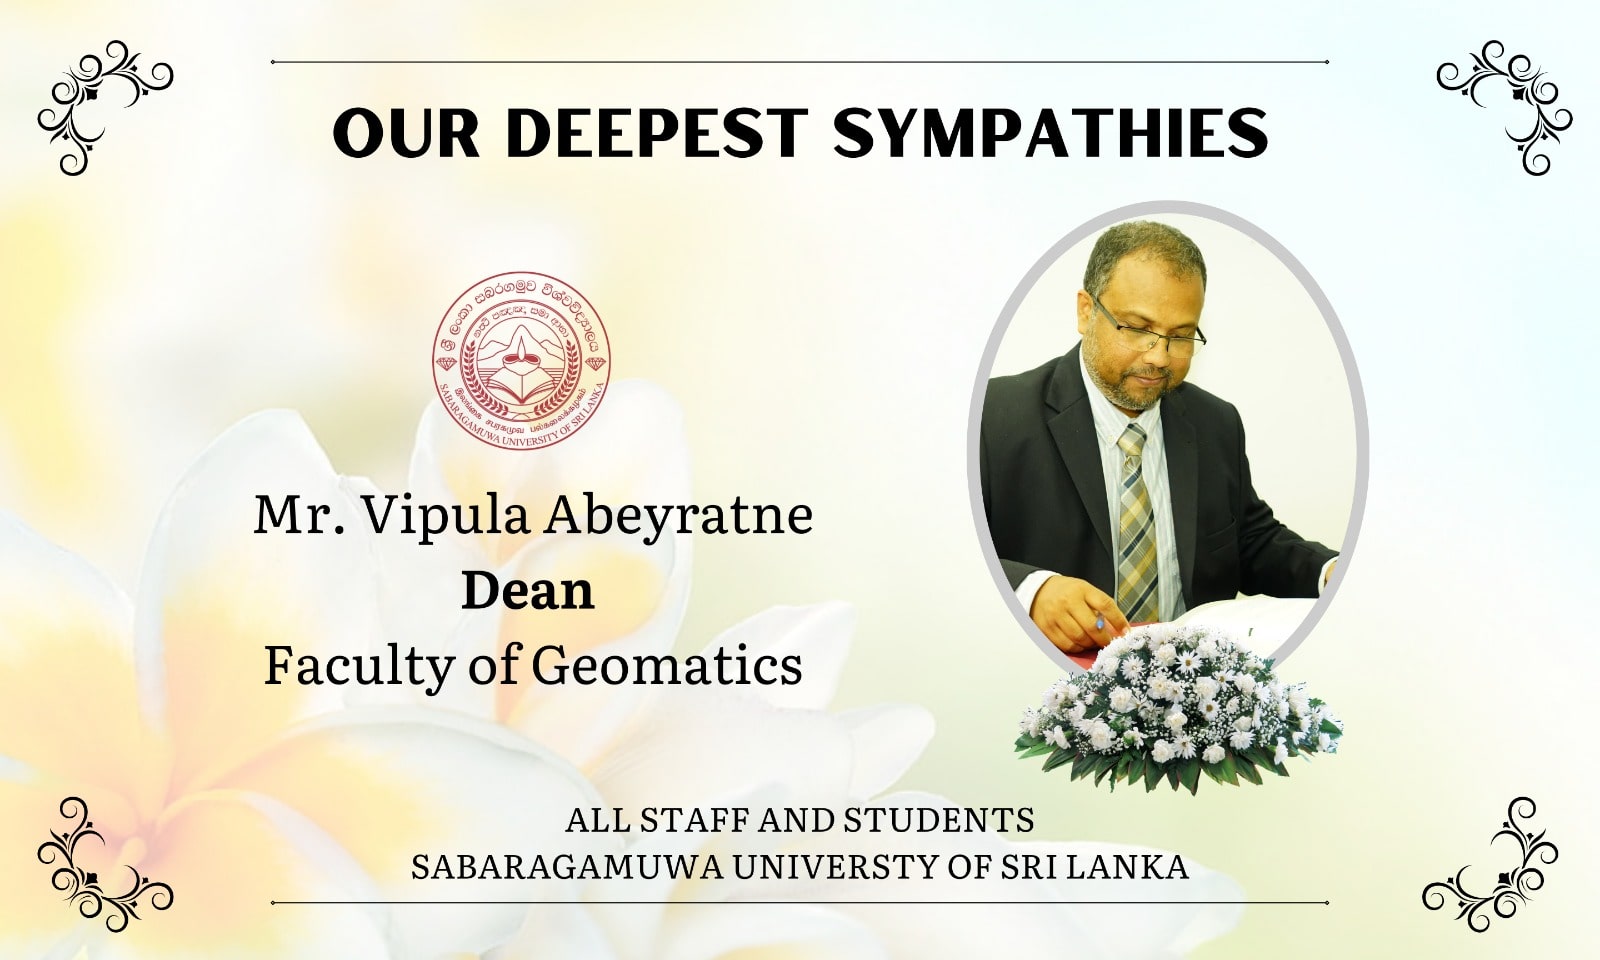 Our Deepest Sympathies on Mr. Vipula Abeyrathna's Passing